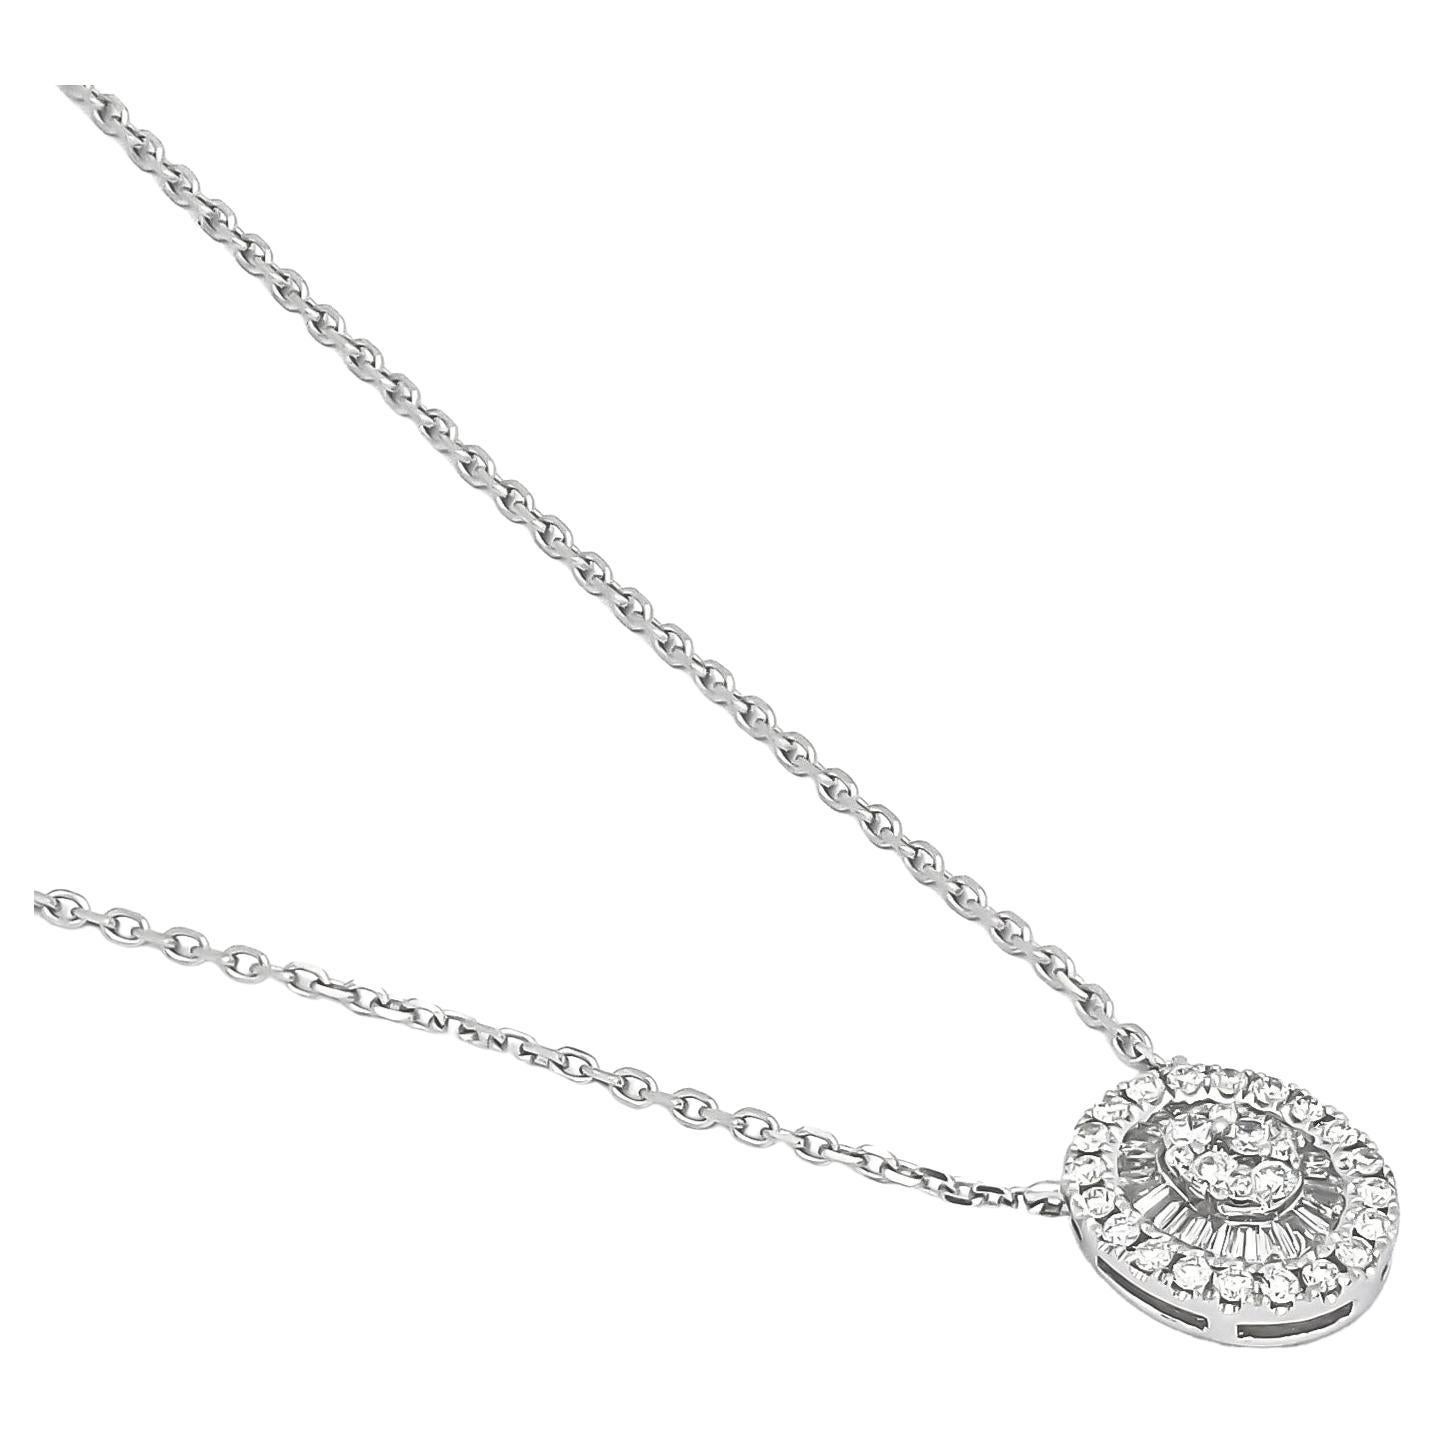 This handmade white gold pendant is enhanced with a round diamond cluster and accented with shimmering baguette diamonds encased in a starburst pattern, creating a look that is both sophisticated and eye-catching.

The pendant is expertly crafted